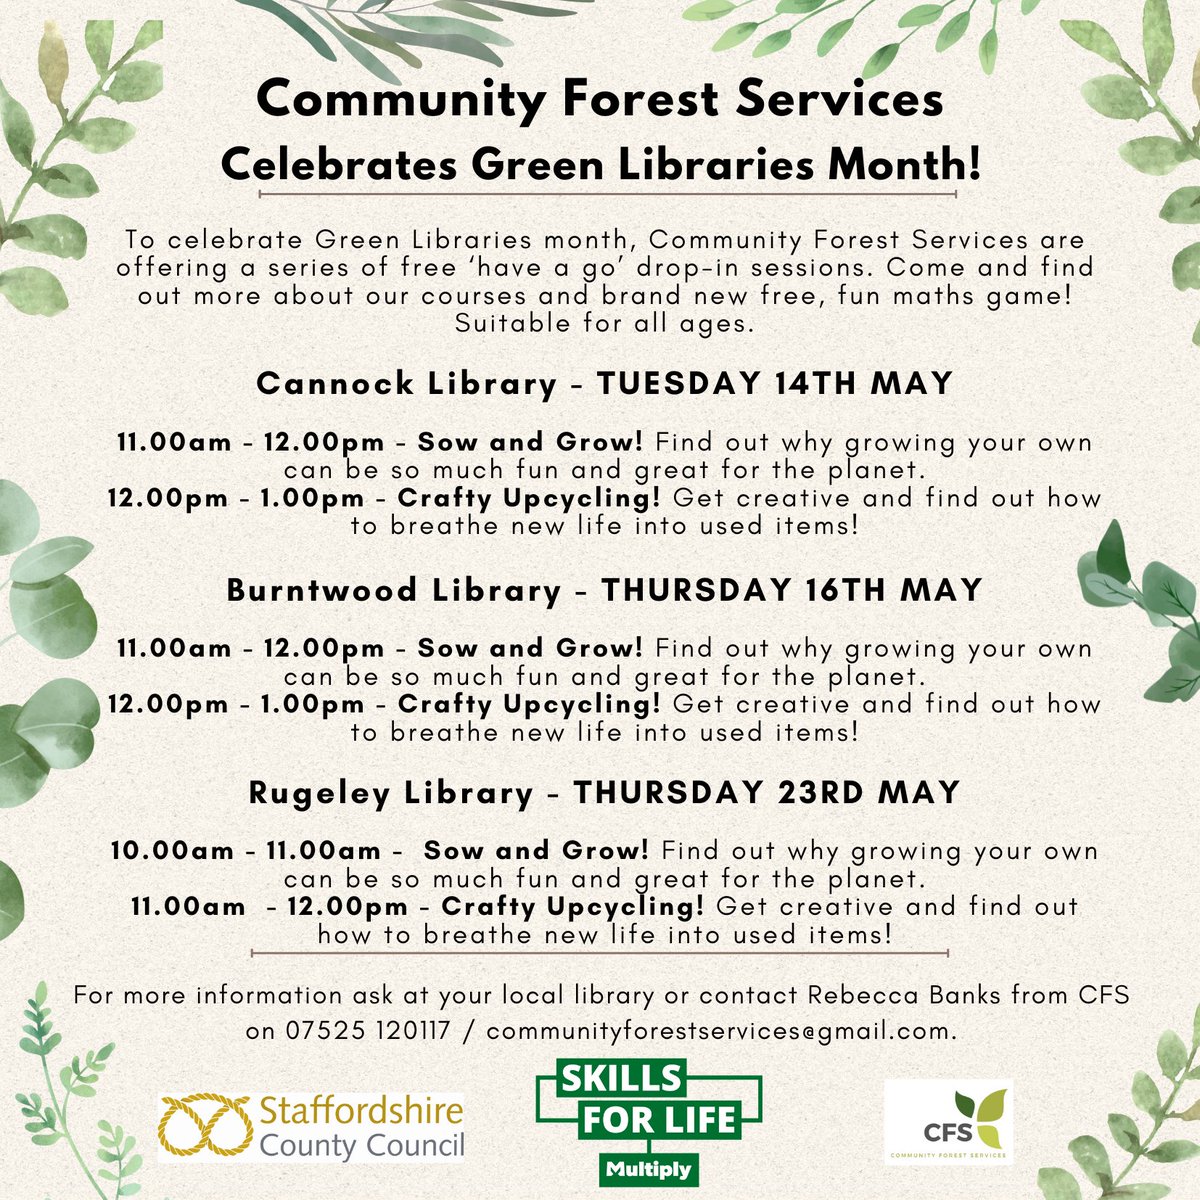 We're going Green with Community Forest Services at #CannockLibrary this morning! Come and see Mandi, she's here until 1pm #GreenLibraries There are more events at #BurntwoodLibrary #RugeleyLibrary See image for more details @CityRugeley @CannockChaseDC @StaffordshireCC